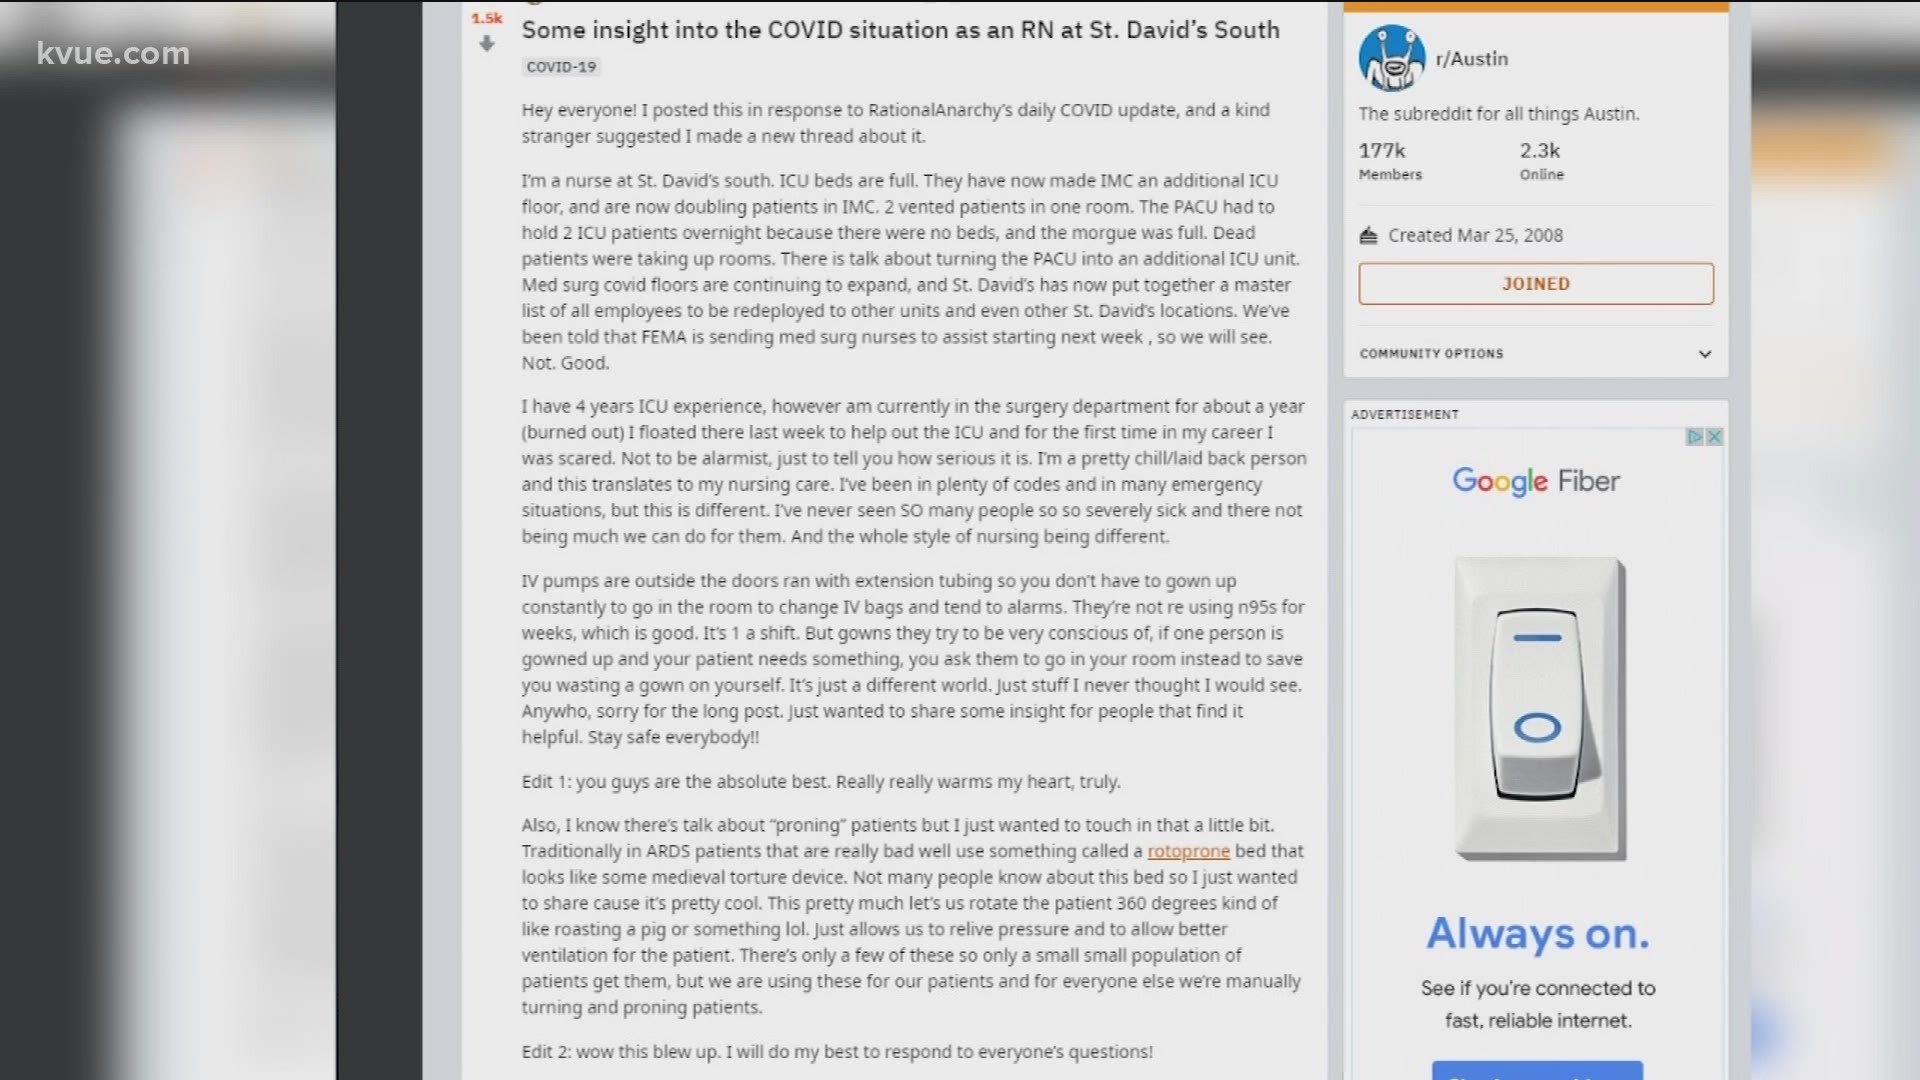 After a post on Reddit from a Texas nurse claims ICU beds and morgues were full gained traction online, a Texas doctor explains the situation to KVUE.